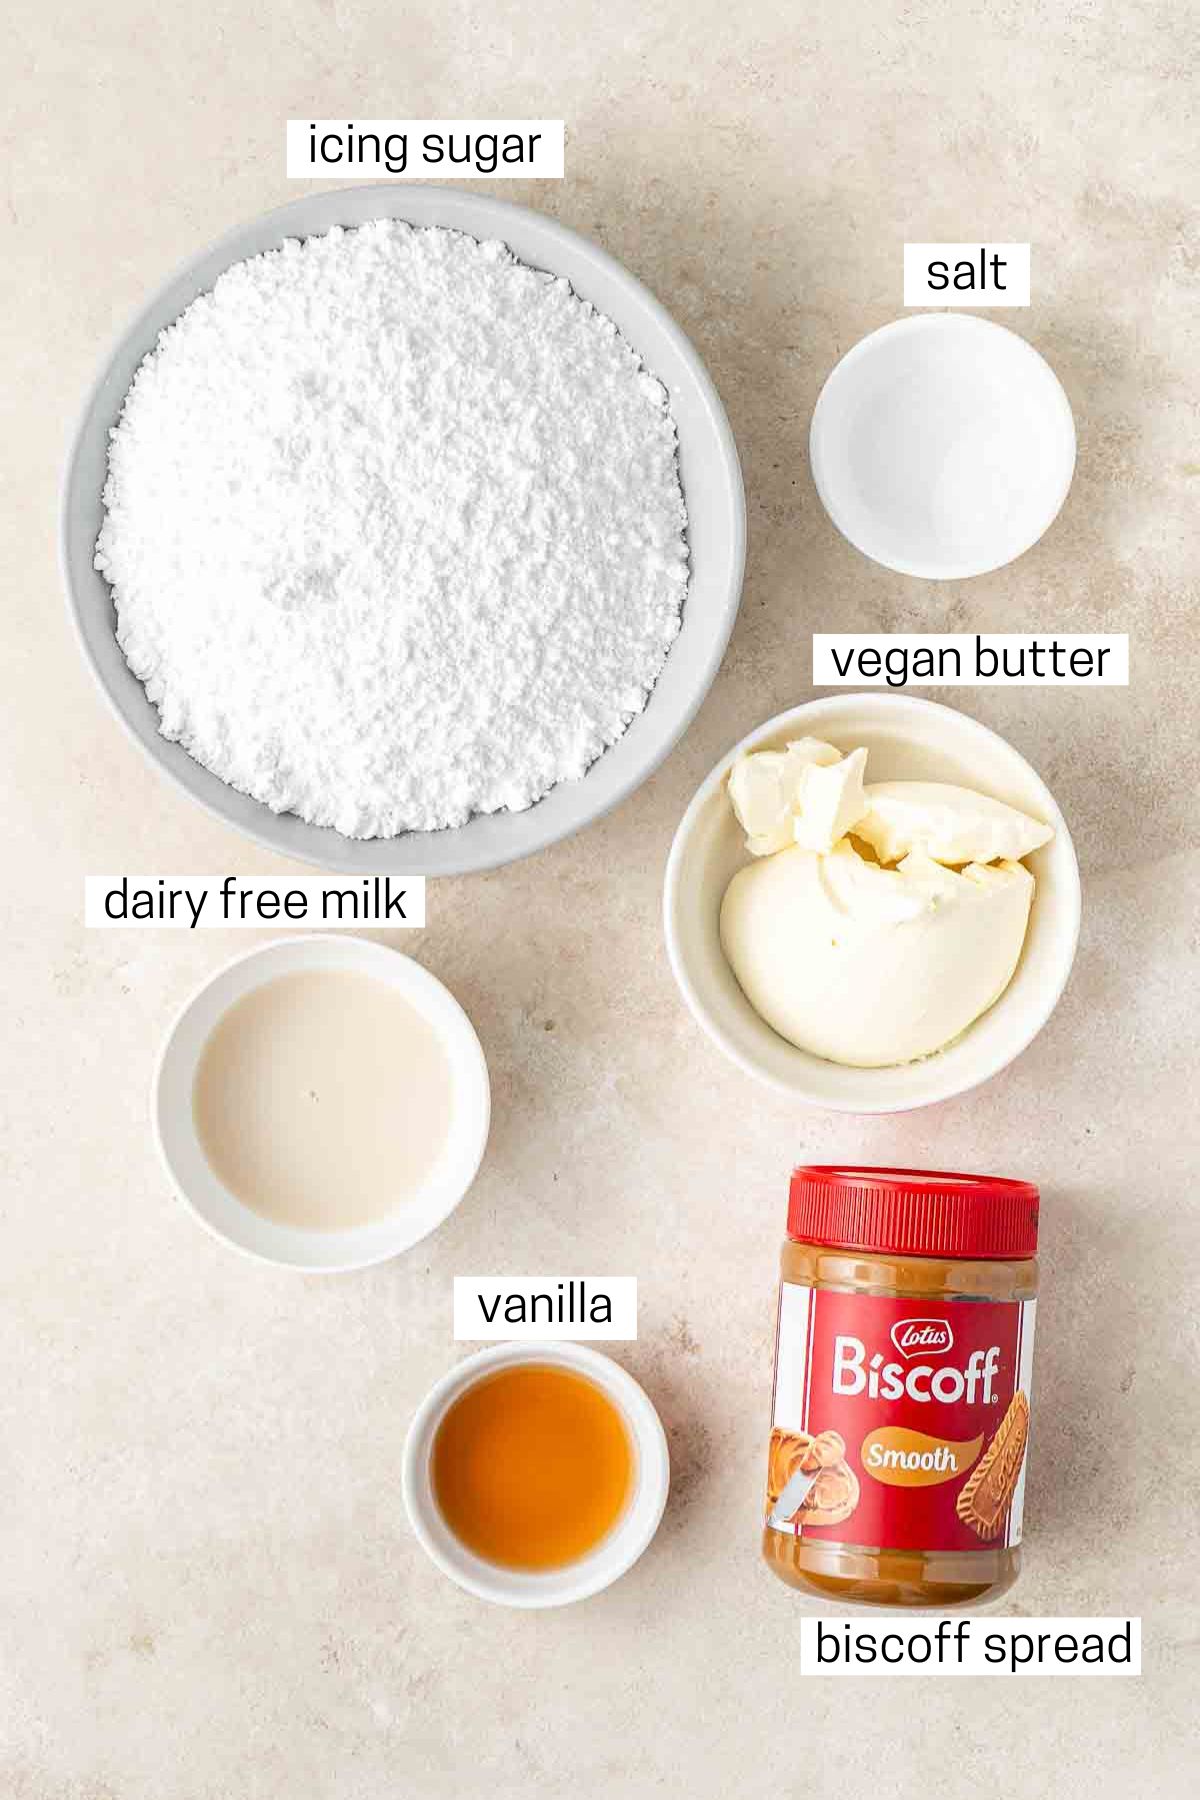 All ingredients needed for vegan biscoff buttercream laid out in small bowls.